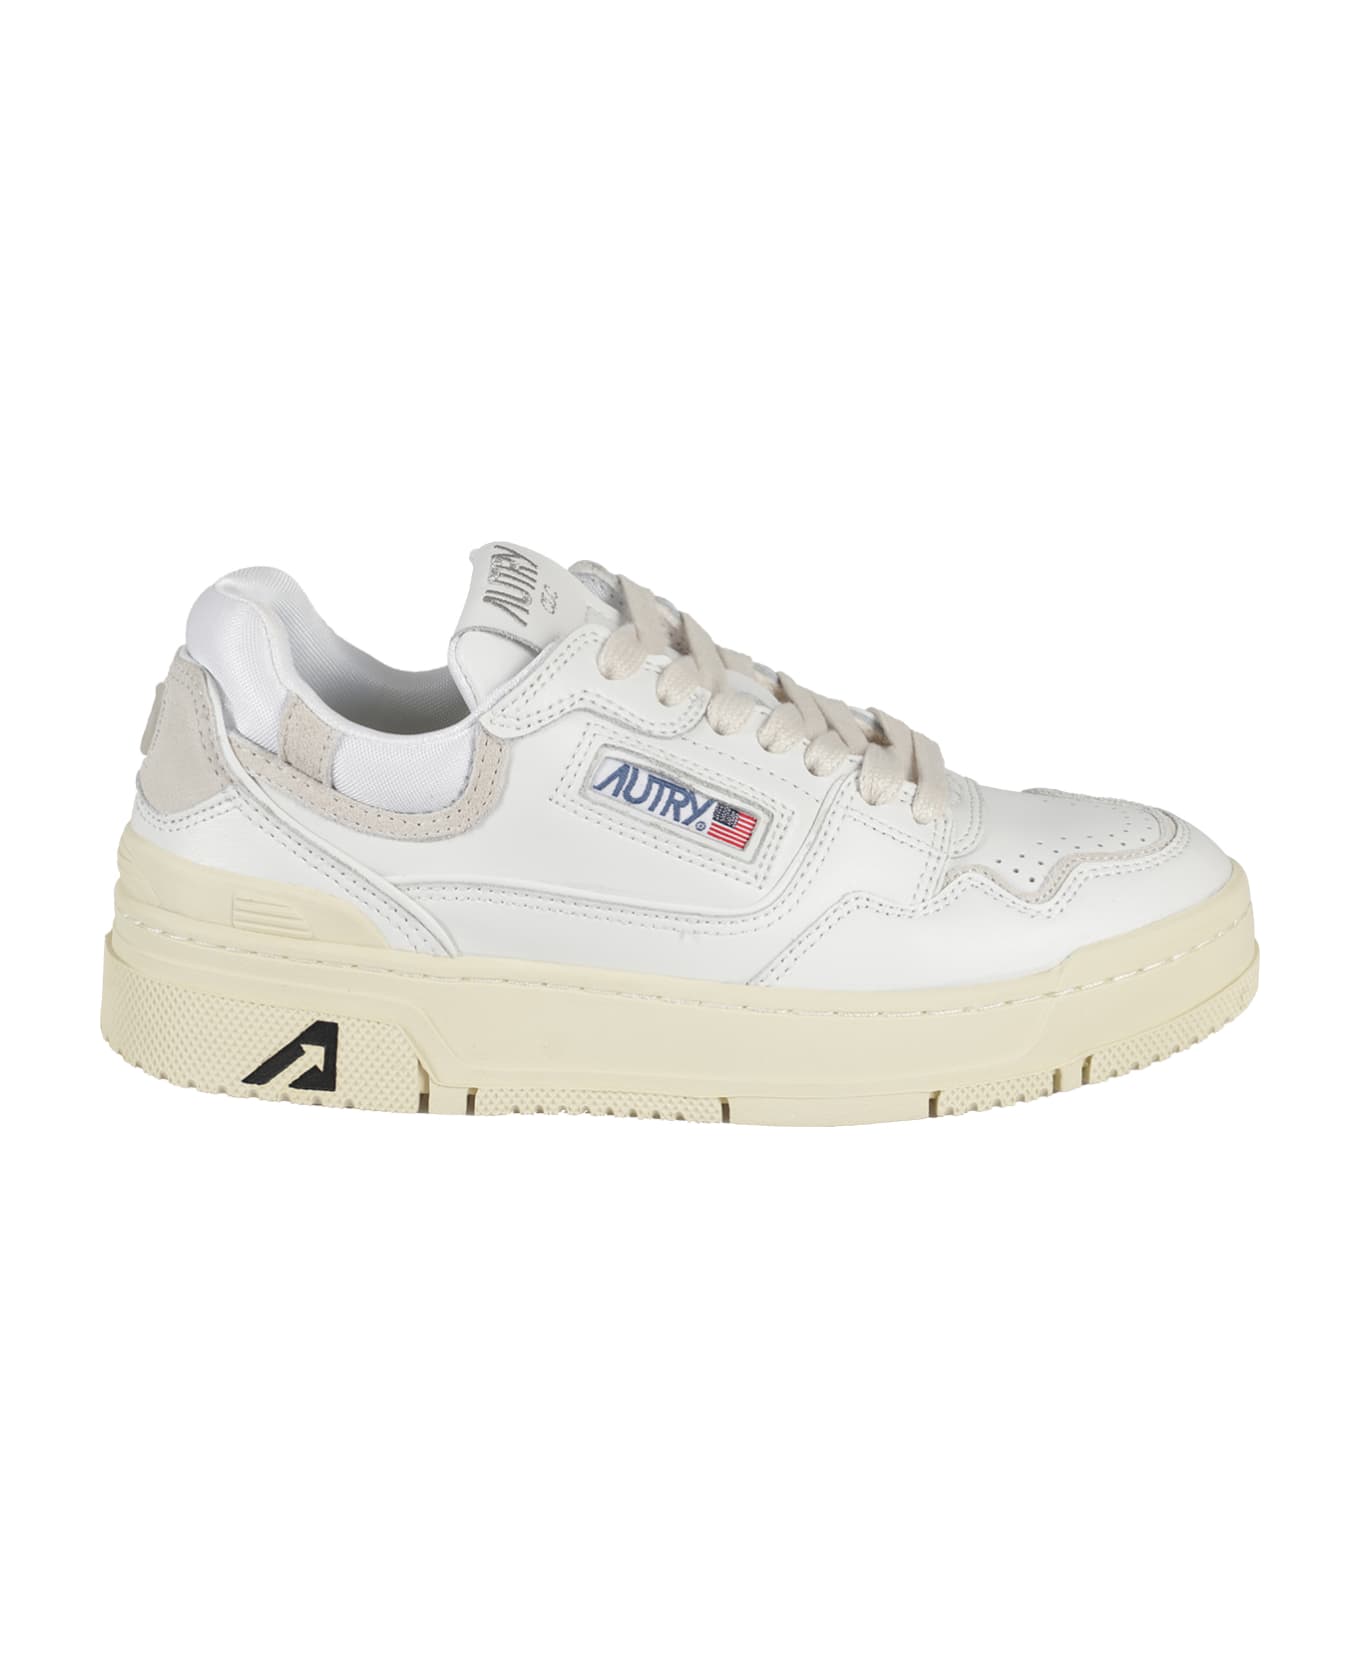 Autry Clc Low Wom - burberry larkhall high eye sneakers